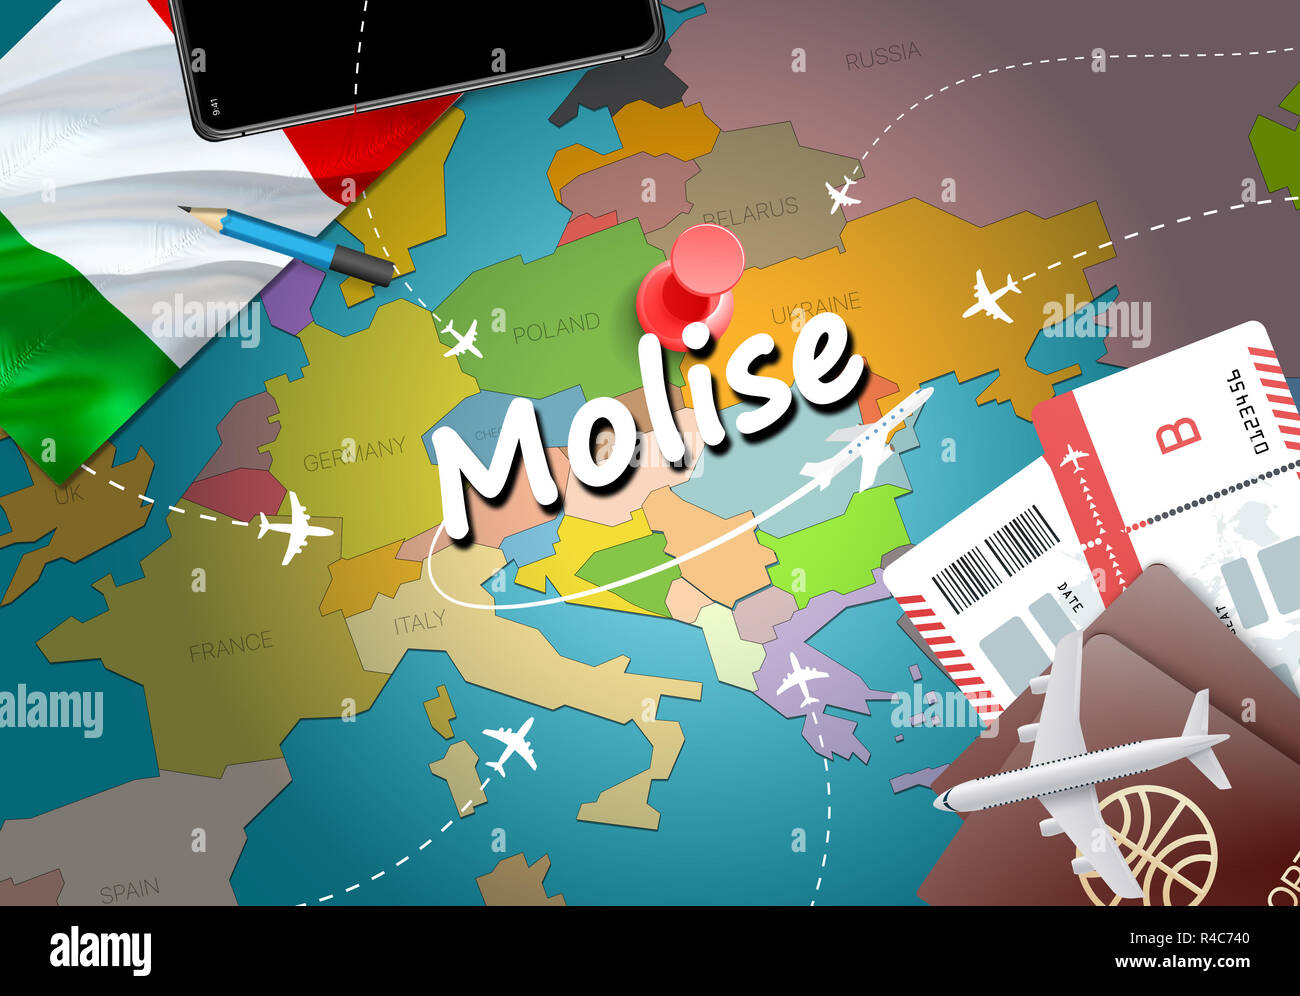 Molise city travel and tourism destination concept. Italy flag and Molise city on map. Italy travel concept map background. Tickets Planes and flights Stock Photo